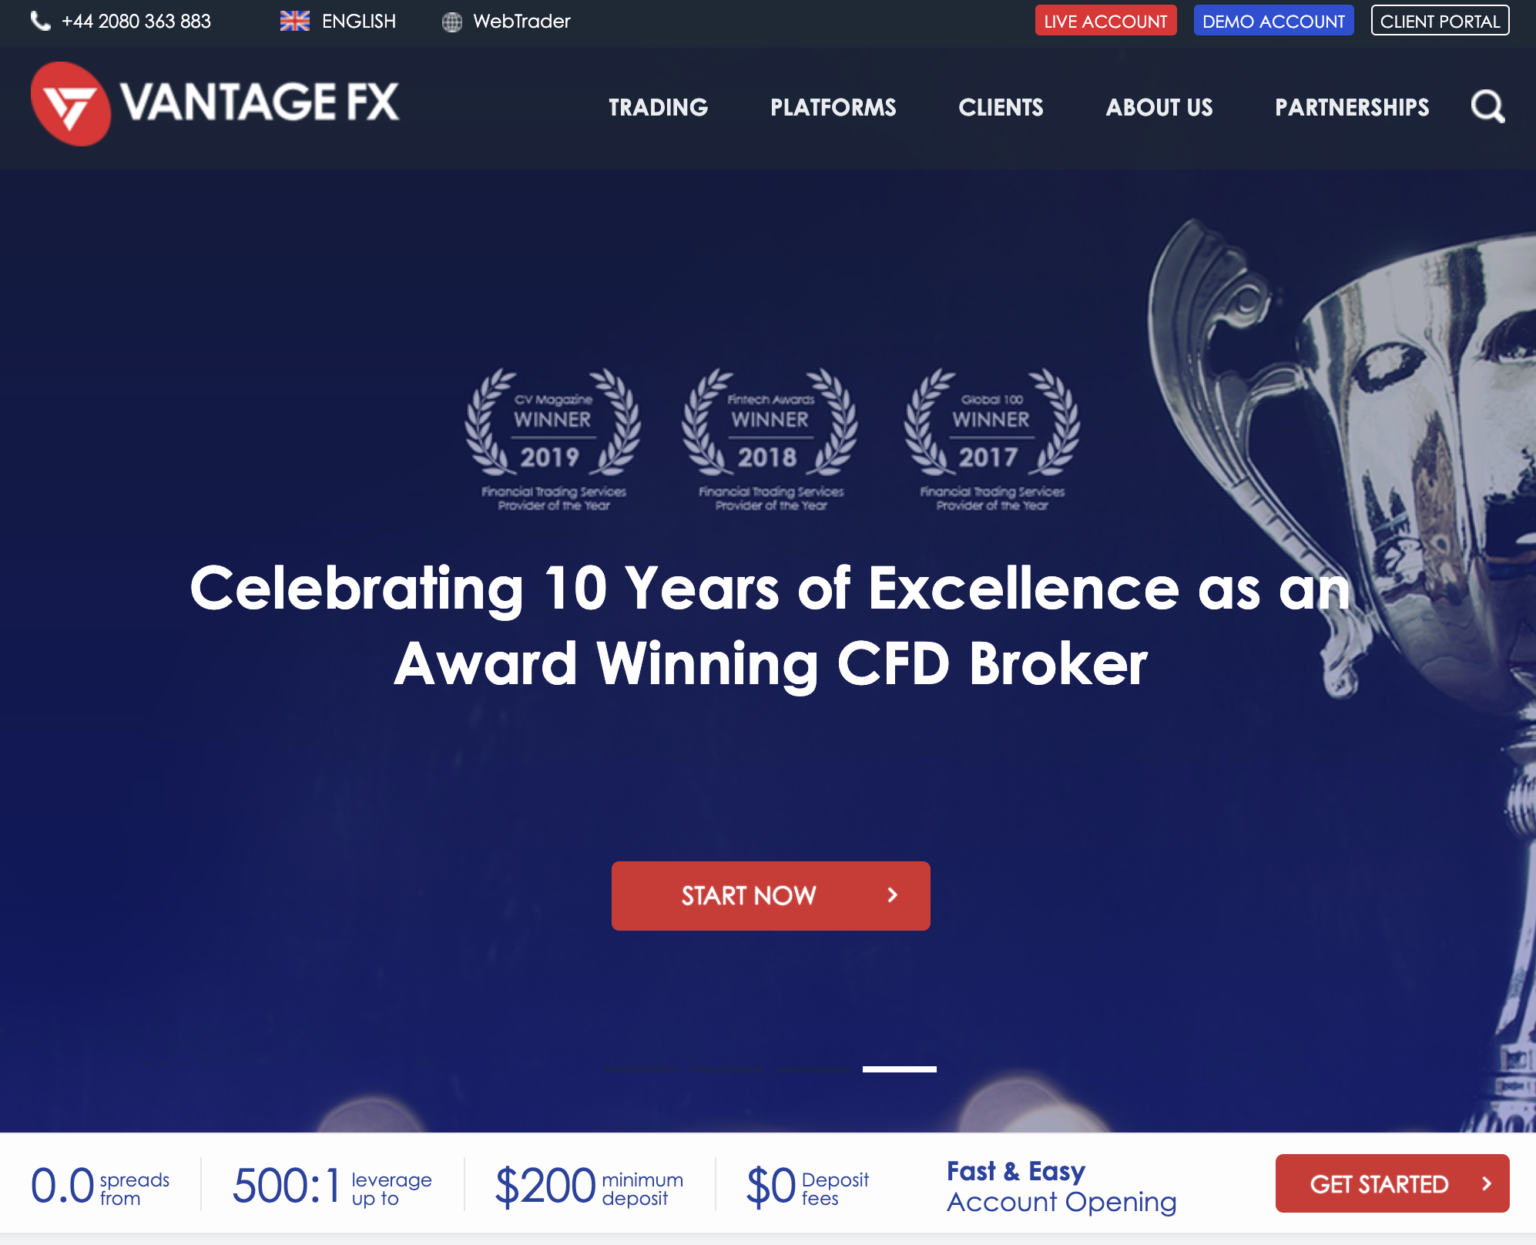 Vantage FX Forex Broker Review 2020 with Pros & Cons by FxExplained